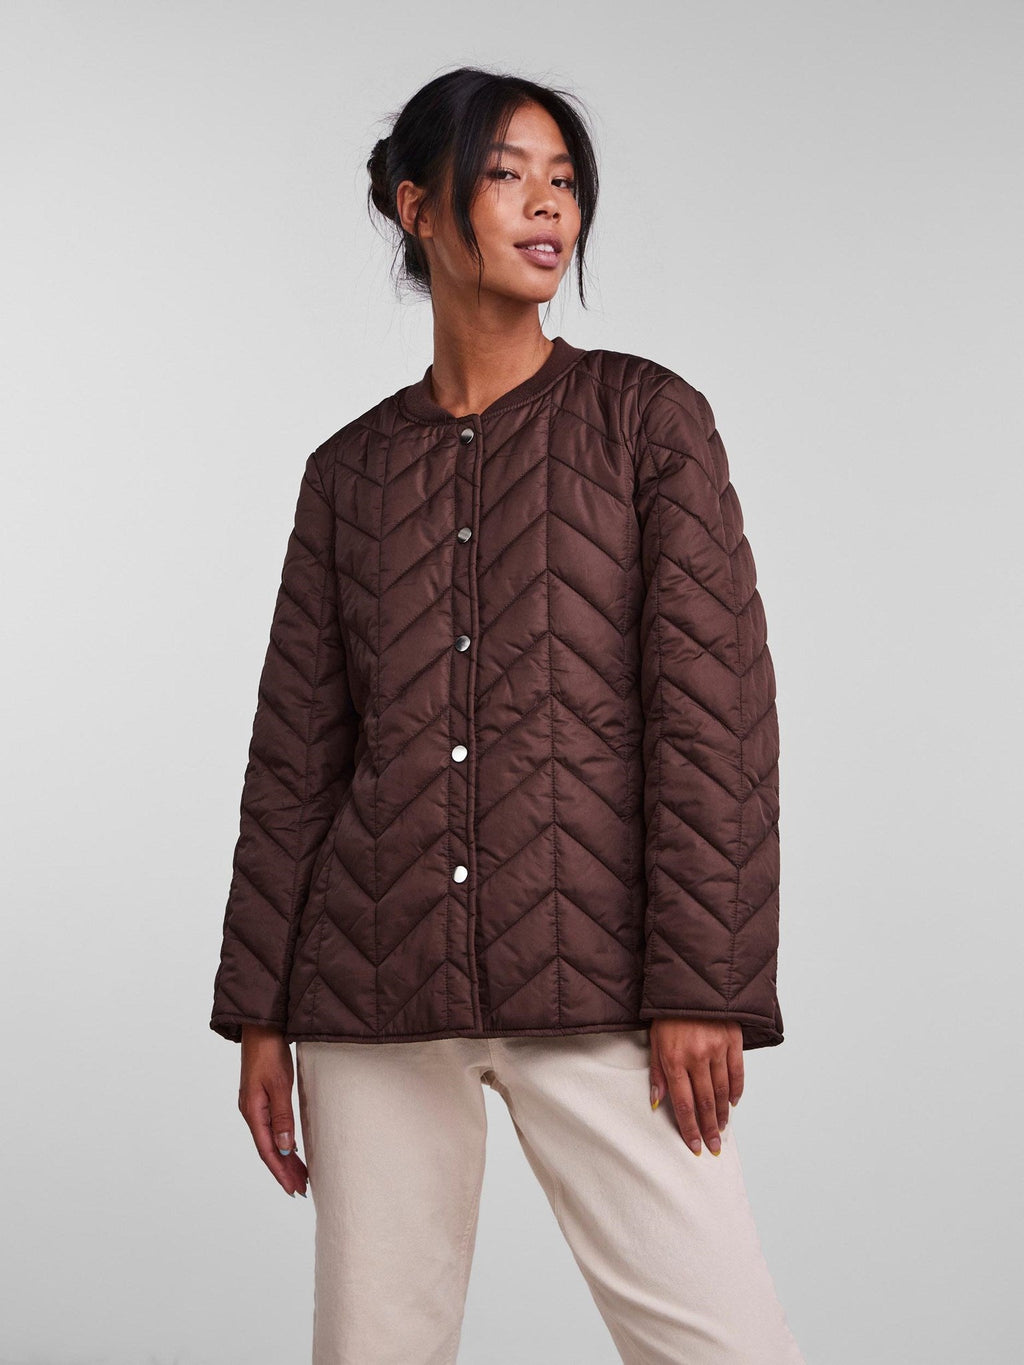 Jacket Quilted Gearr Fawn - Caife Chicory